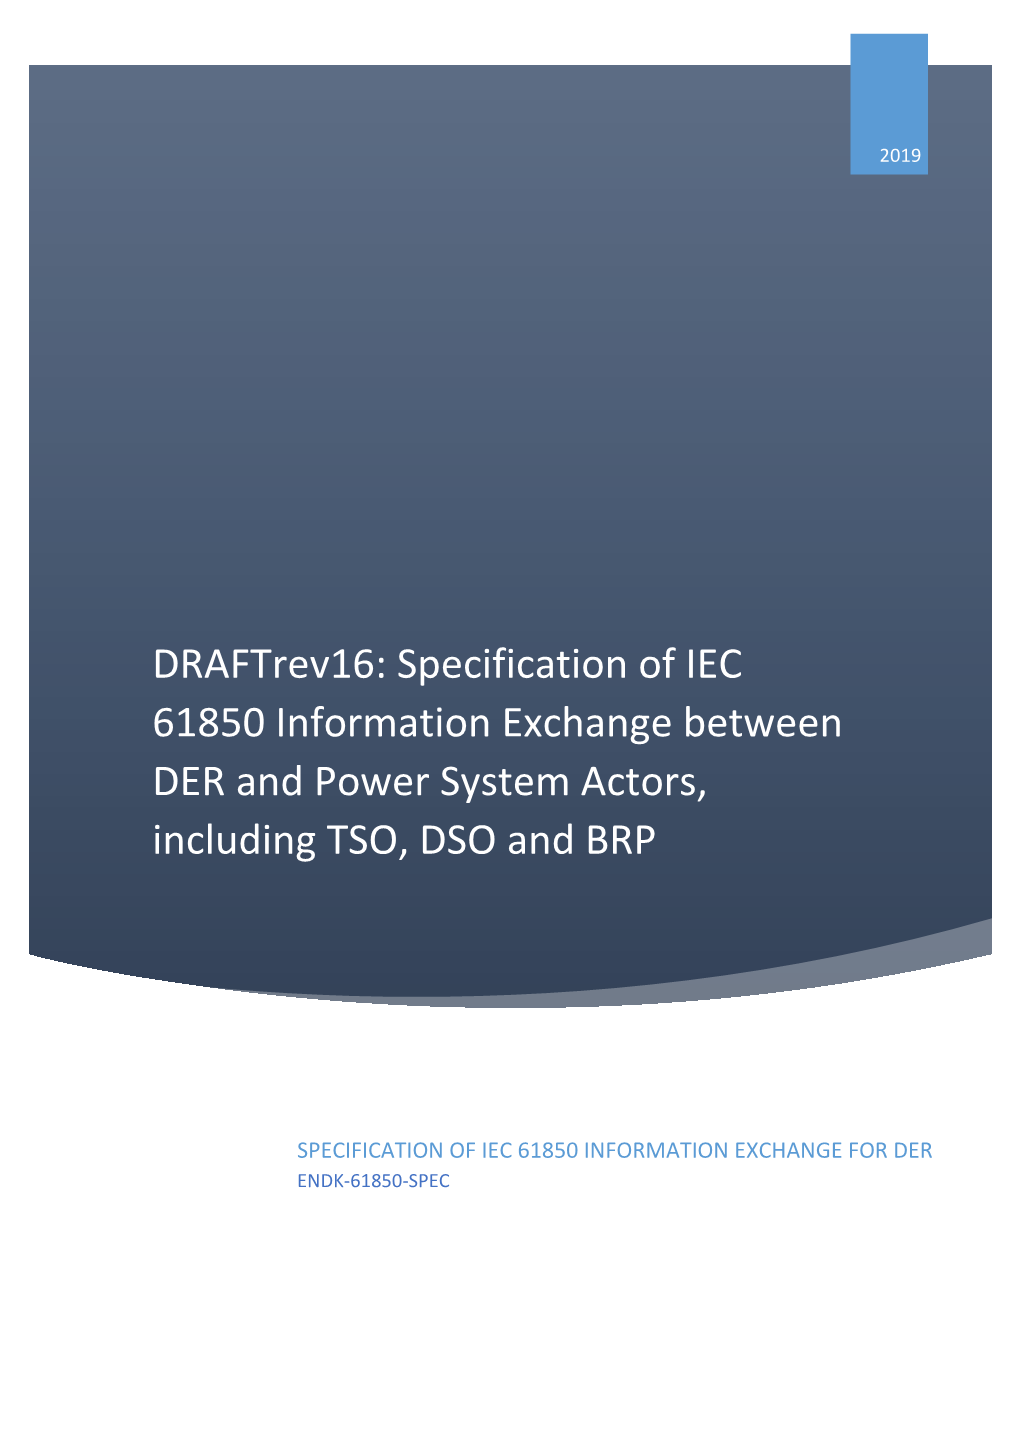 Specification of IEC 61850 Information Exchange Between DER and Power System Actors, Including TSO, DSO and BRP